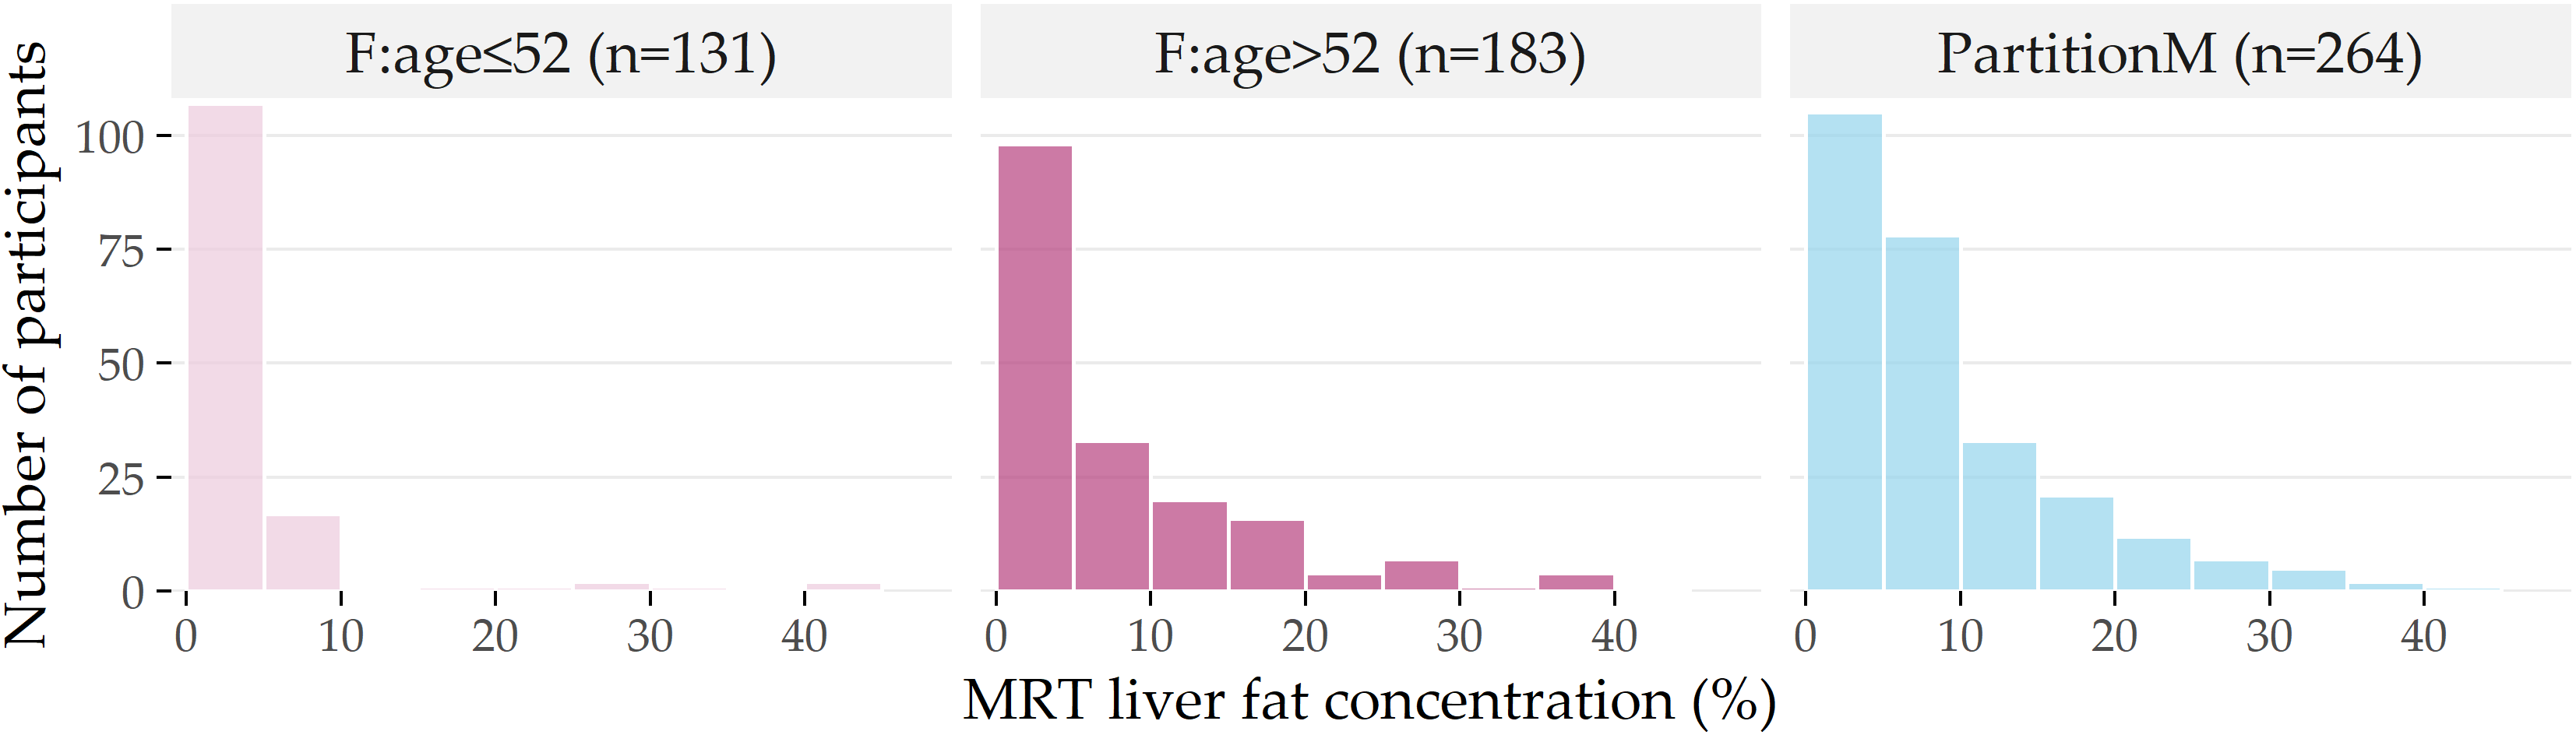 Distribution of liver fat concentration for each partition. Distribution of liver fat concentration in male participants (PartitionM), and females younger and older than 52 years. The horizontal axis shows the liver fat concentration in bins of 5%, while the vertical axis indicates the number of participants in each bin.